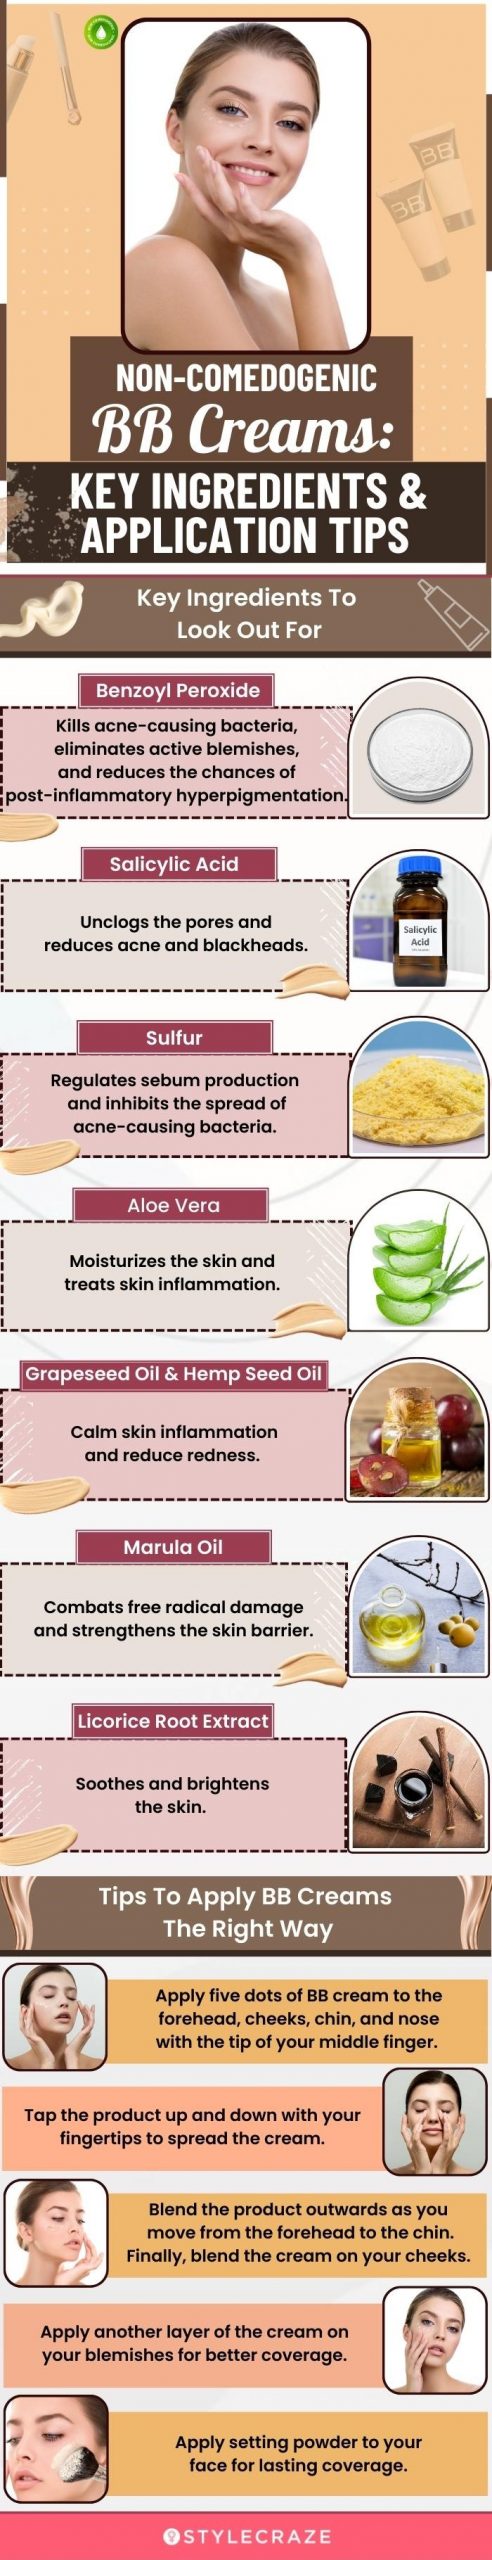 Non-Comedogenic BB Creams: Key Ingredients And Application Tips (infographic)